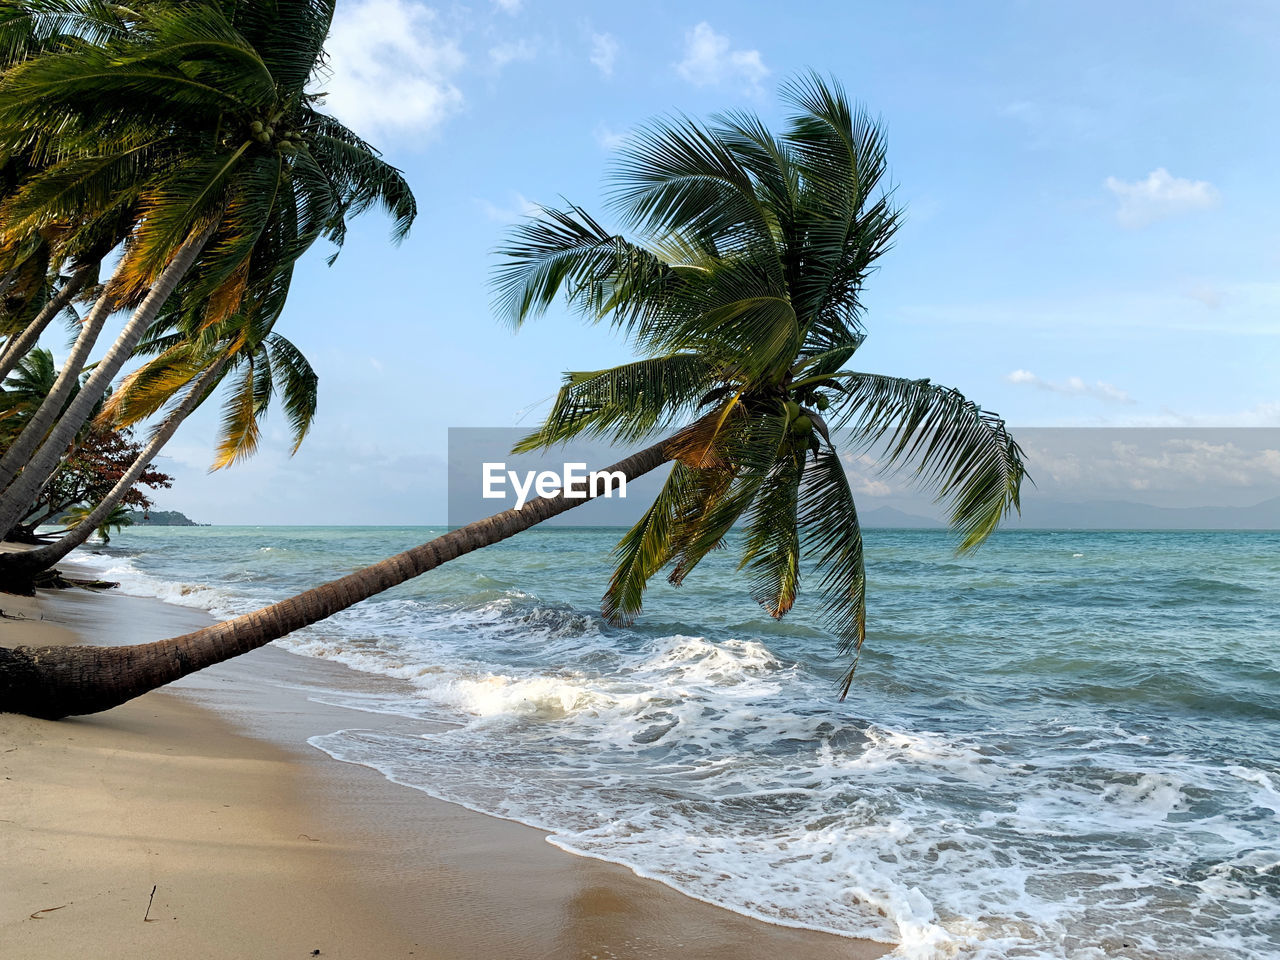 sea, water, beach, land, tropical climate, palm tree, tree, body of water, sky, tropics, beauty in nature, ocean, nature, vacation, scenics - nature, sand, shore, plant, coast, coconut palm tree, wave, horizon over water, tranquility, cloud, horizon, travel destinations, tropical tree, tranquil scene, idyllic, holiday, motion, travel, trip, water sports, outdoors, sports, island, no people, coastline, day, environment, seascape, water's edge, sunlight, tourism, non-urban scene, palm leaf, leaf, coconut, bay, landscape